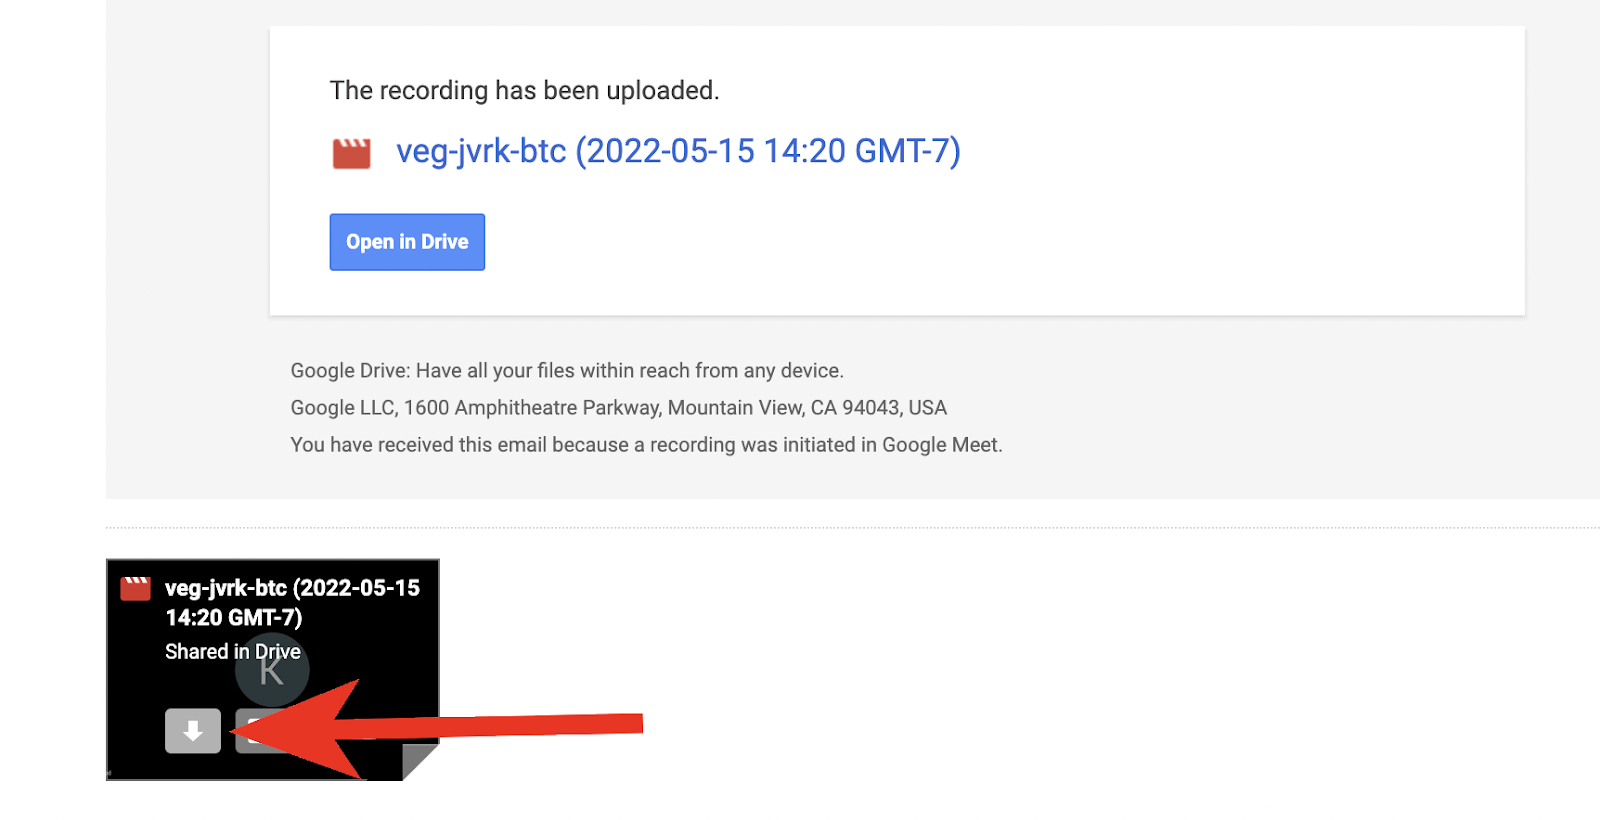 A red arrow points to a download icon on the Google Meet meeting recording in email.